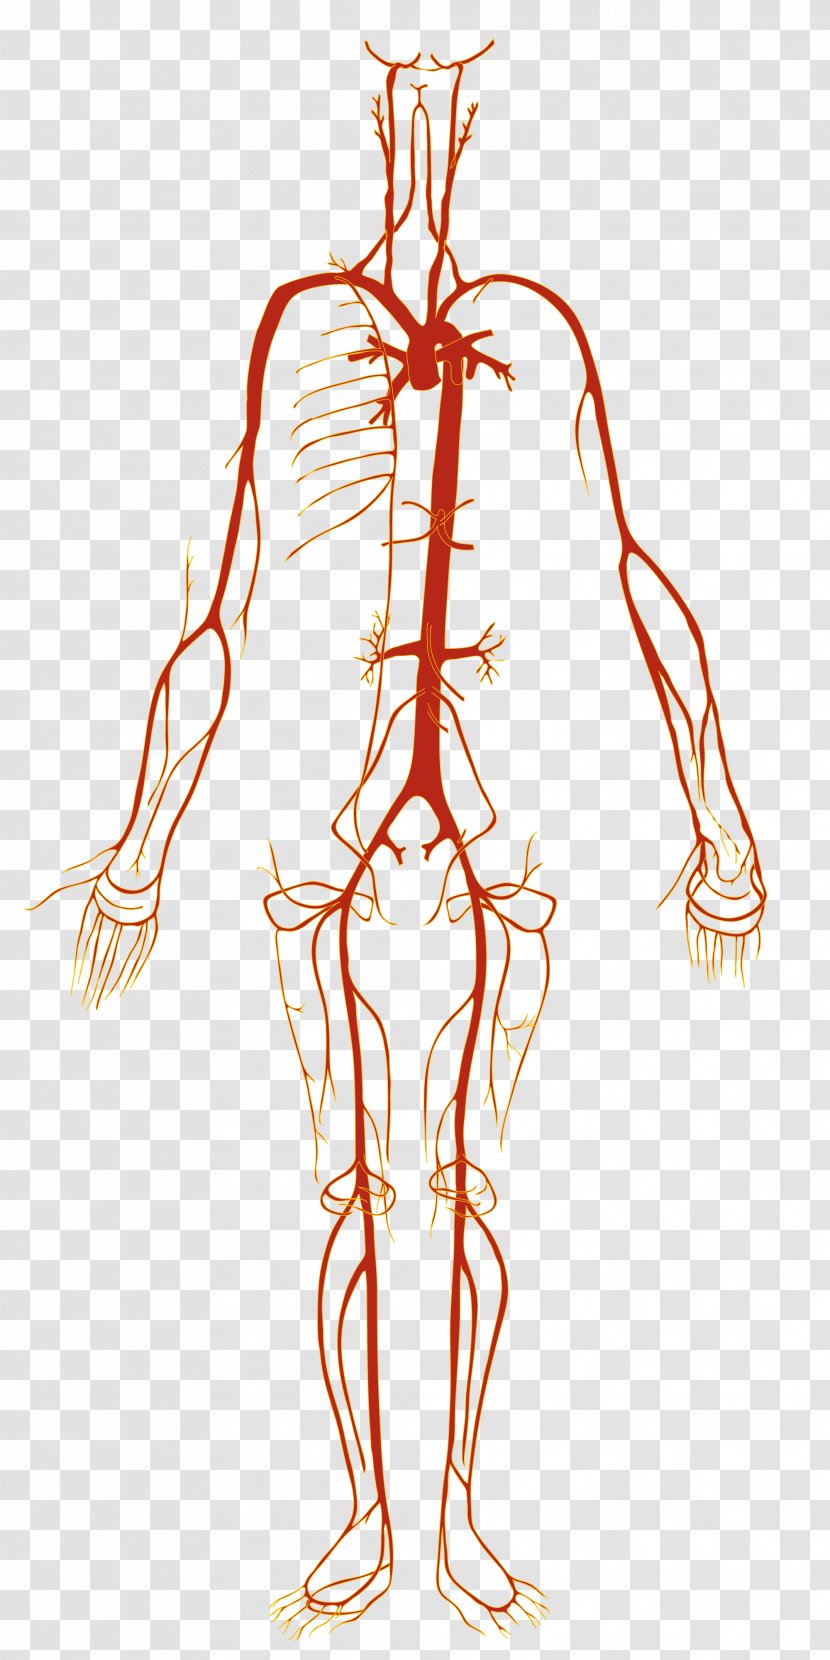 Artery Human Body Blood Vessel Anatomy - Silhouette - Acupoint Diagram Transparent PNG